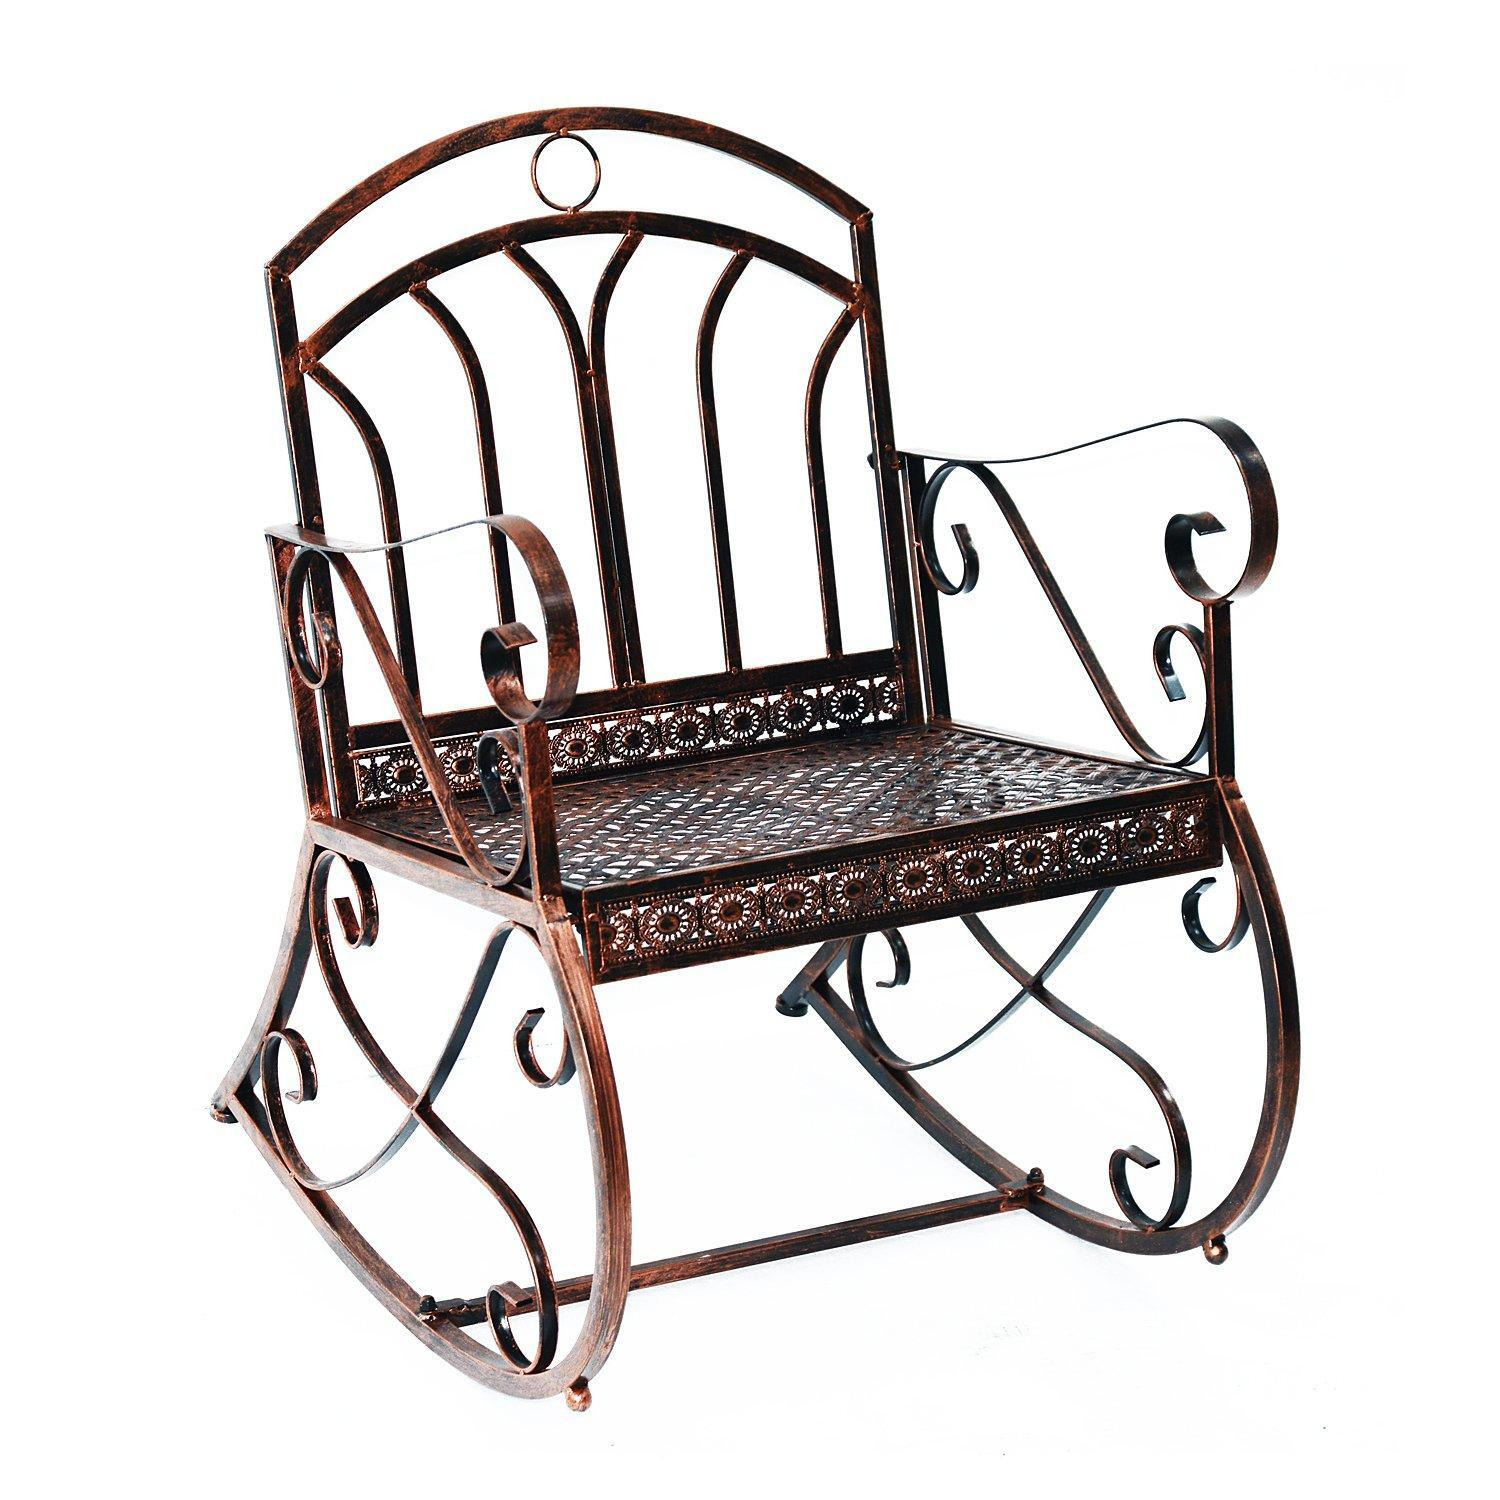 Rocking Chair Outdoor Metal Vintage Style Garden Seat for Patio - image 1